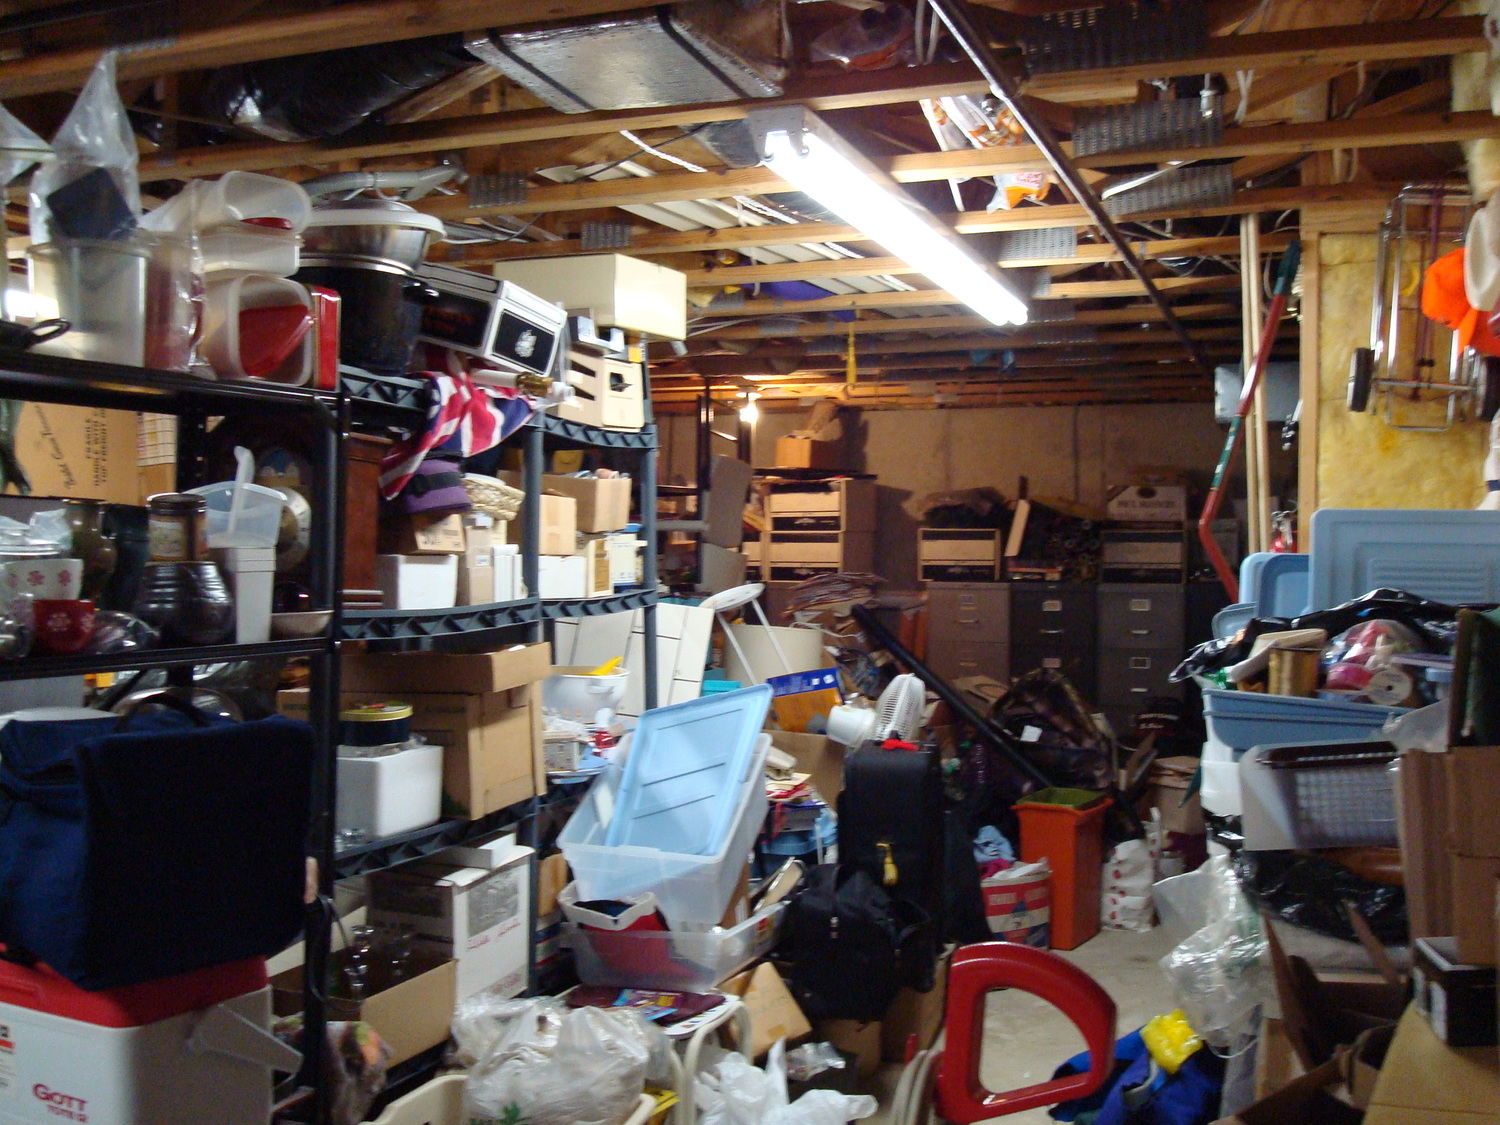 How to Handle an Estate Cleanout - Dumpsters.com